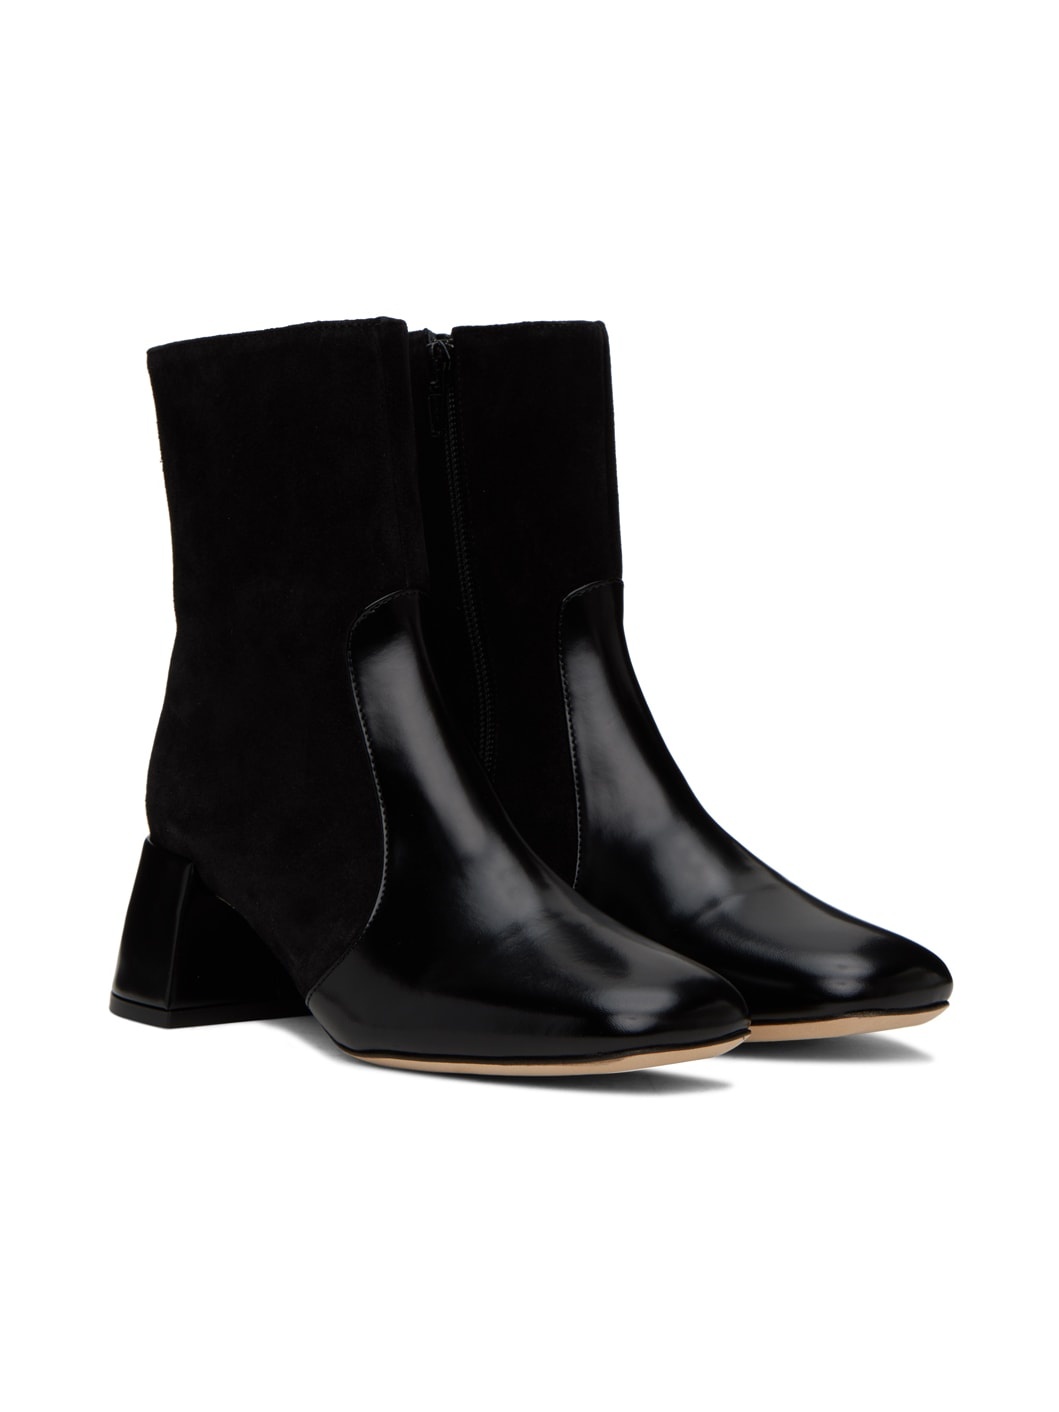 Black Andy Boots - 4